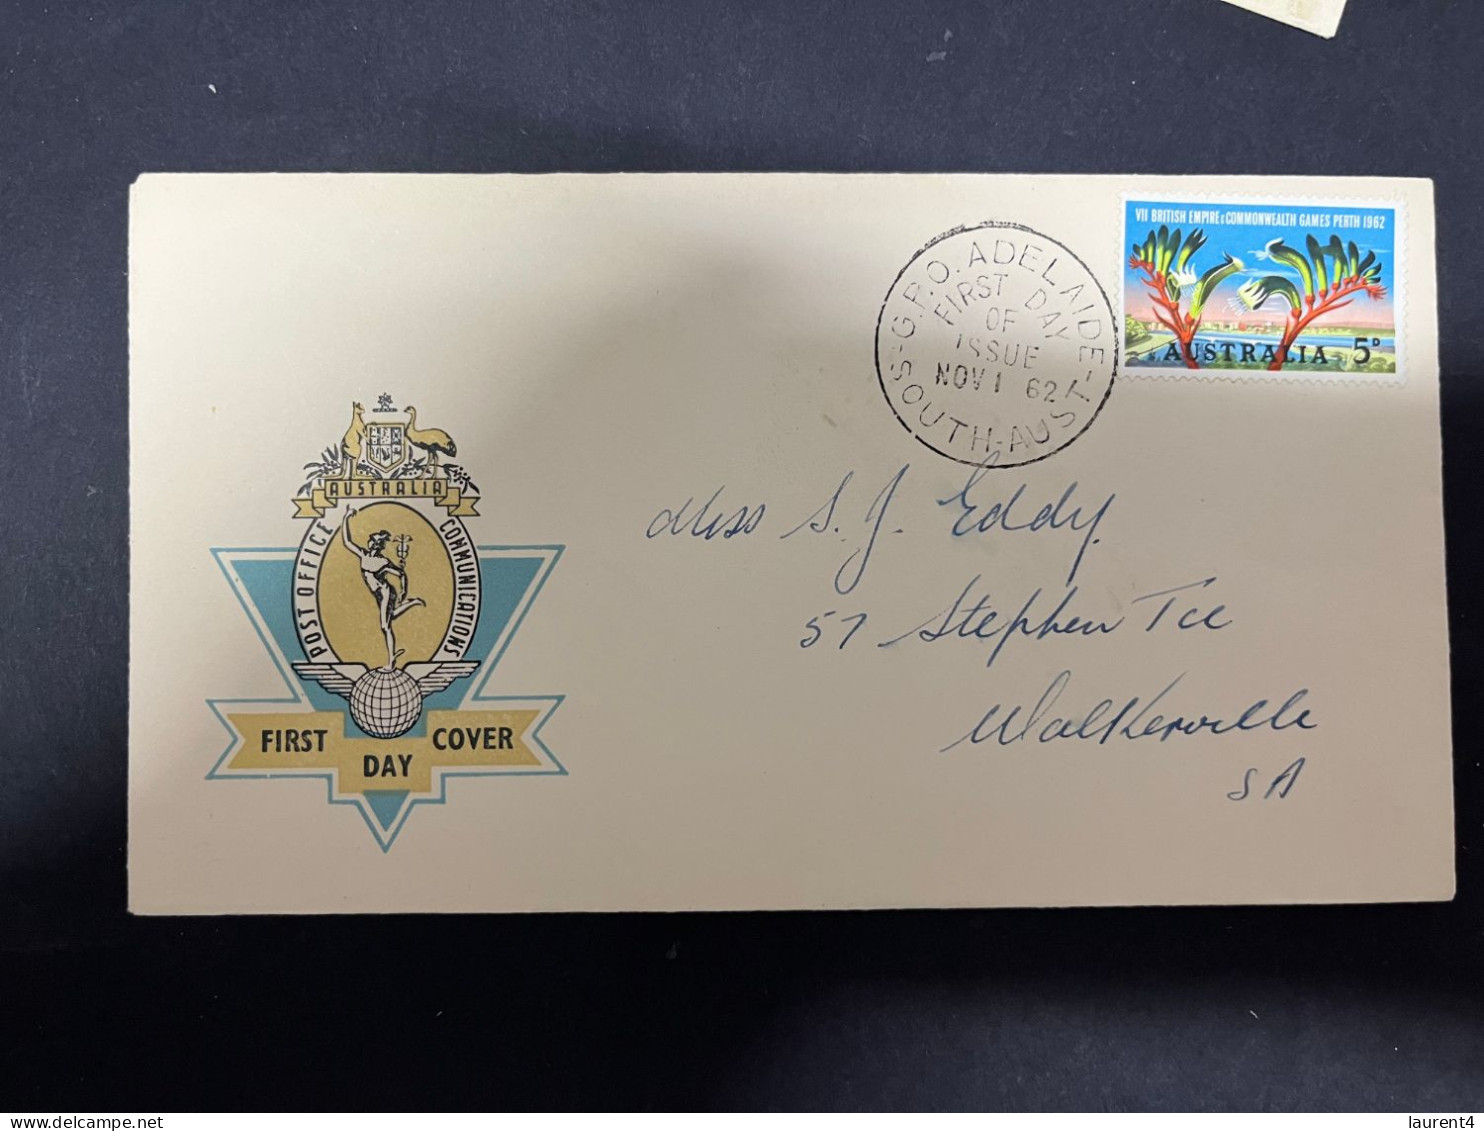 14-5-2024 (5 Z 9) Australia FDC - 1962 - Perth British Empire Games (now Called Commonwealth Games) - Premiers Jours (FDC)